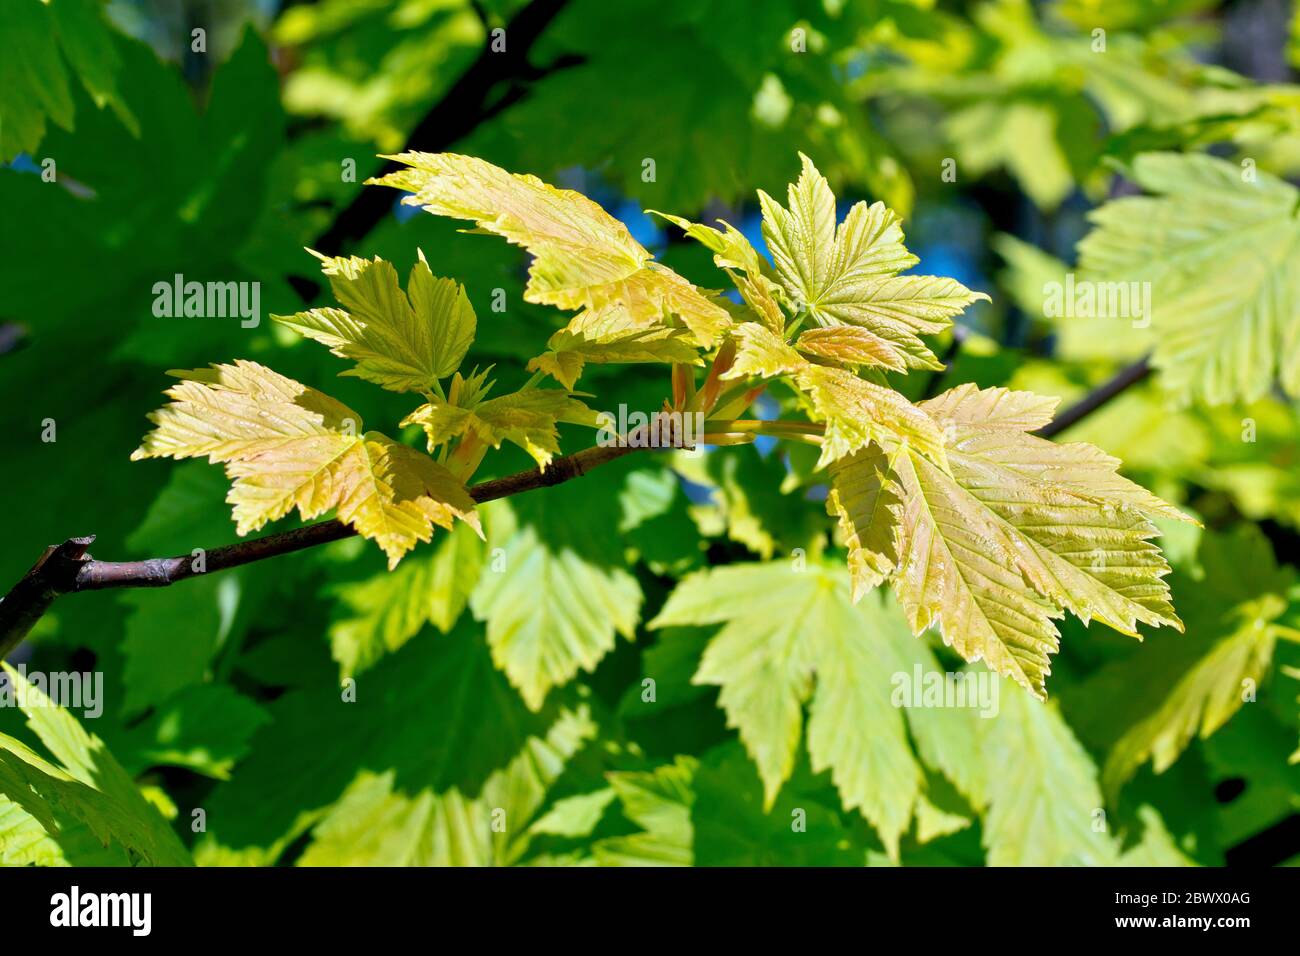 Sycamore (acer pseudoplatanus), close up of a branch of new leaves showing their reddish colouring against the older green ones in the background. Stock Photo